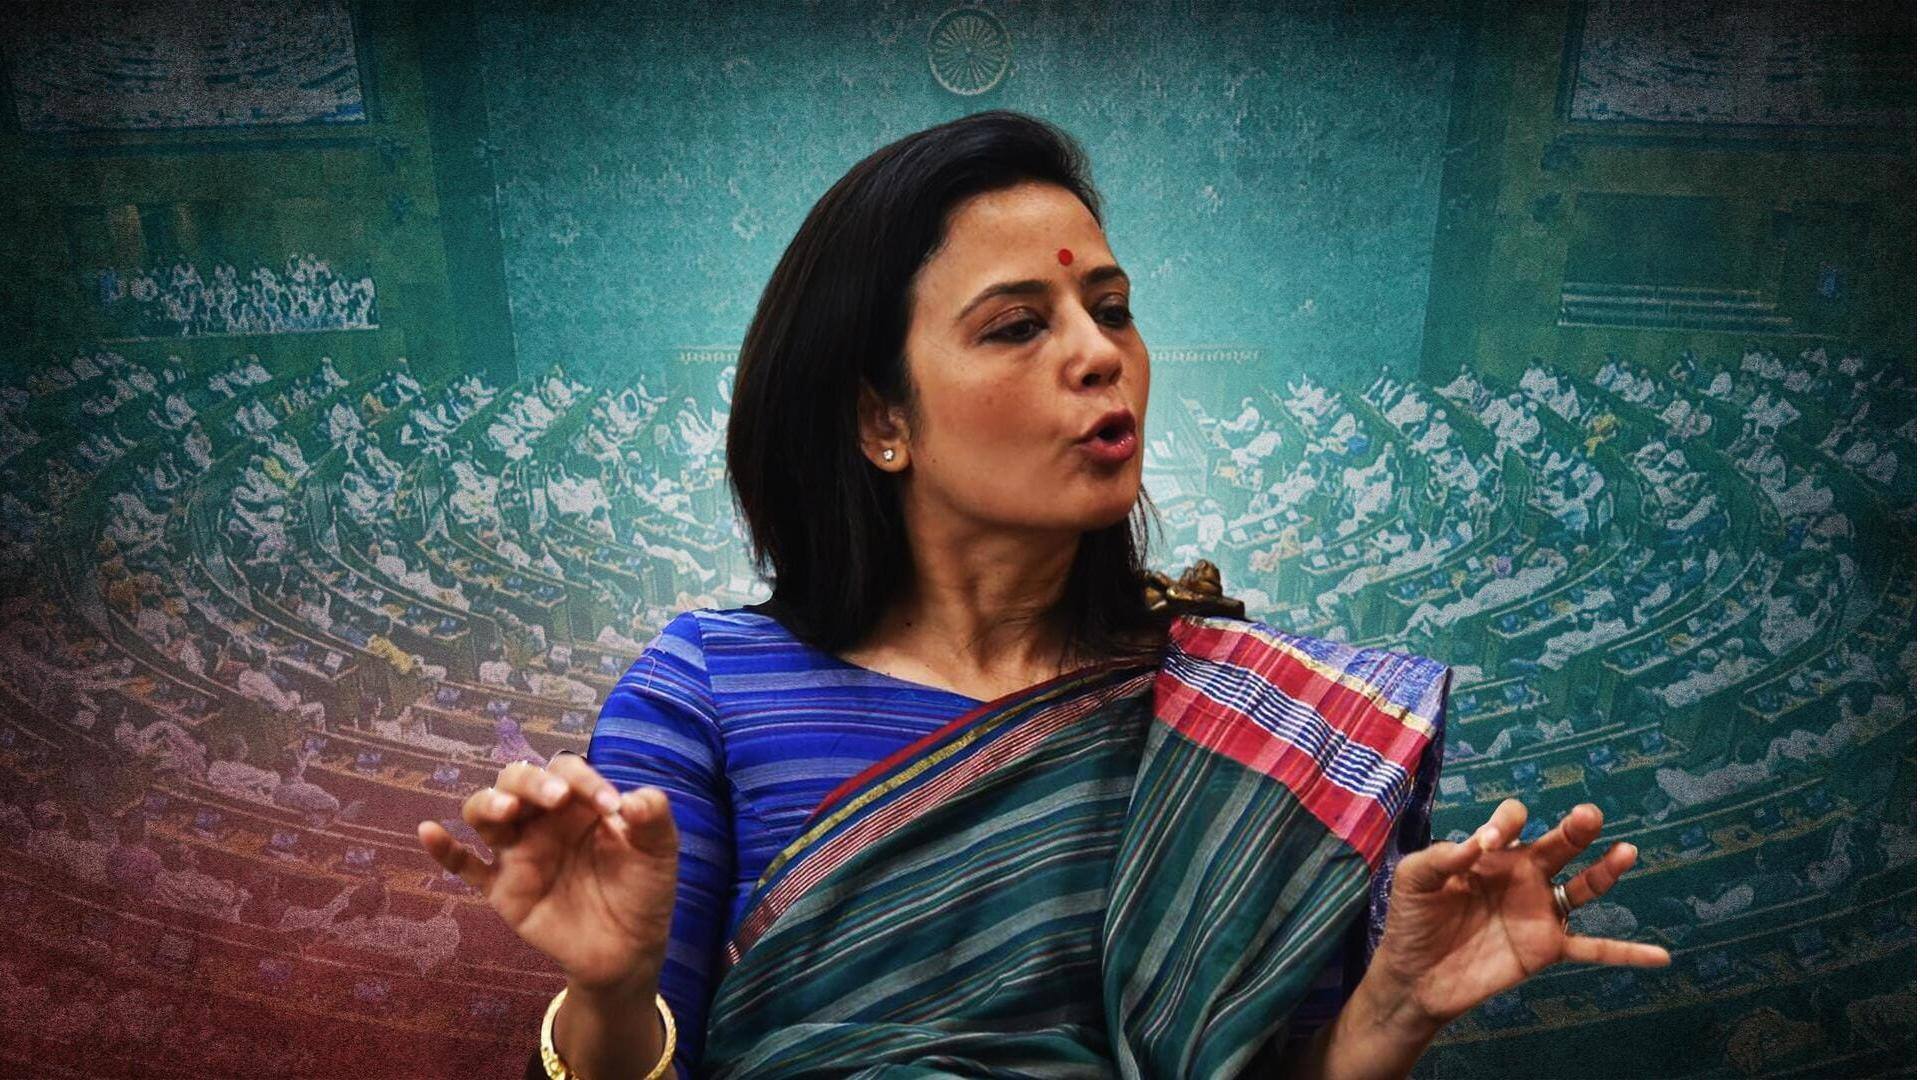 Panel report on Mahua Moitra tabled, House adjourned till 2pm